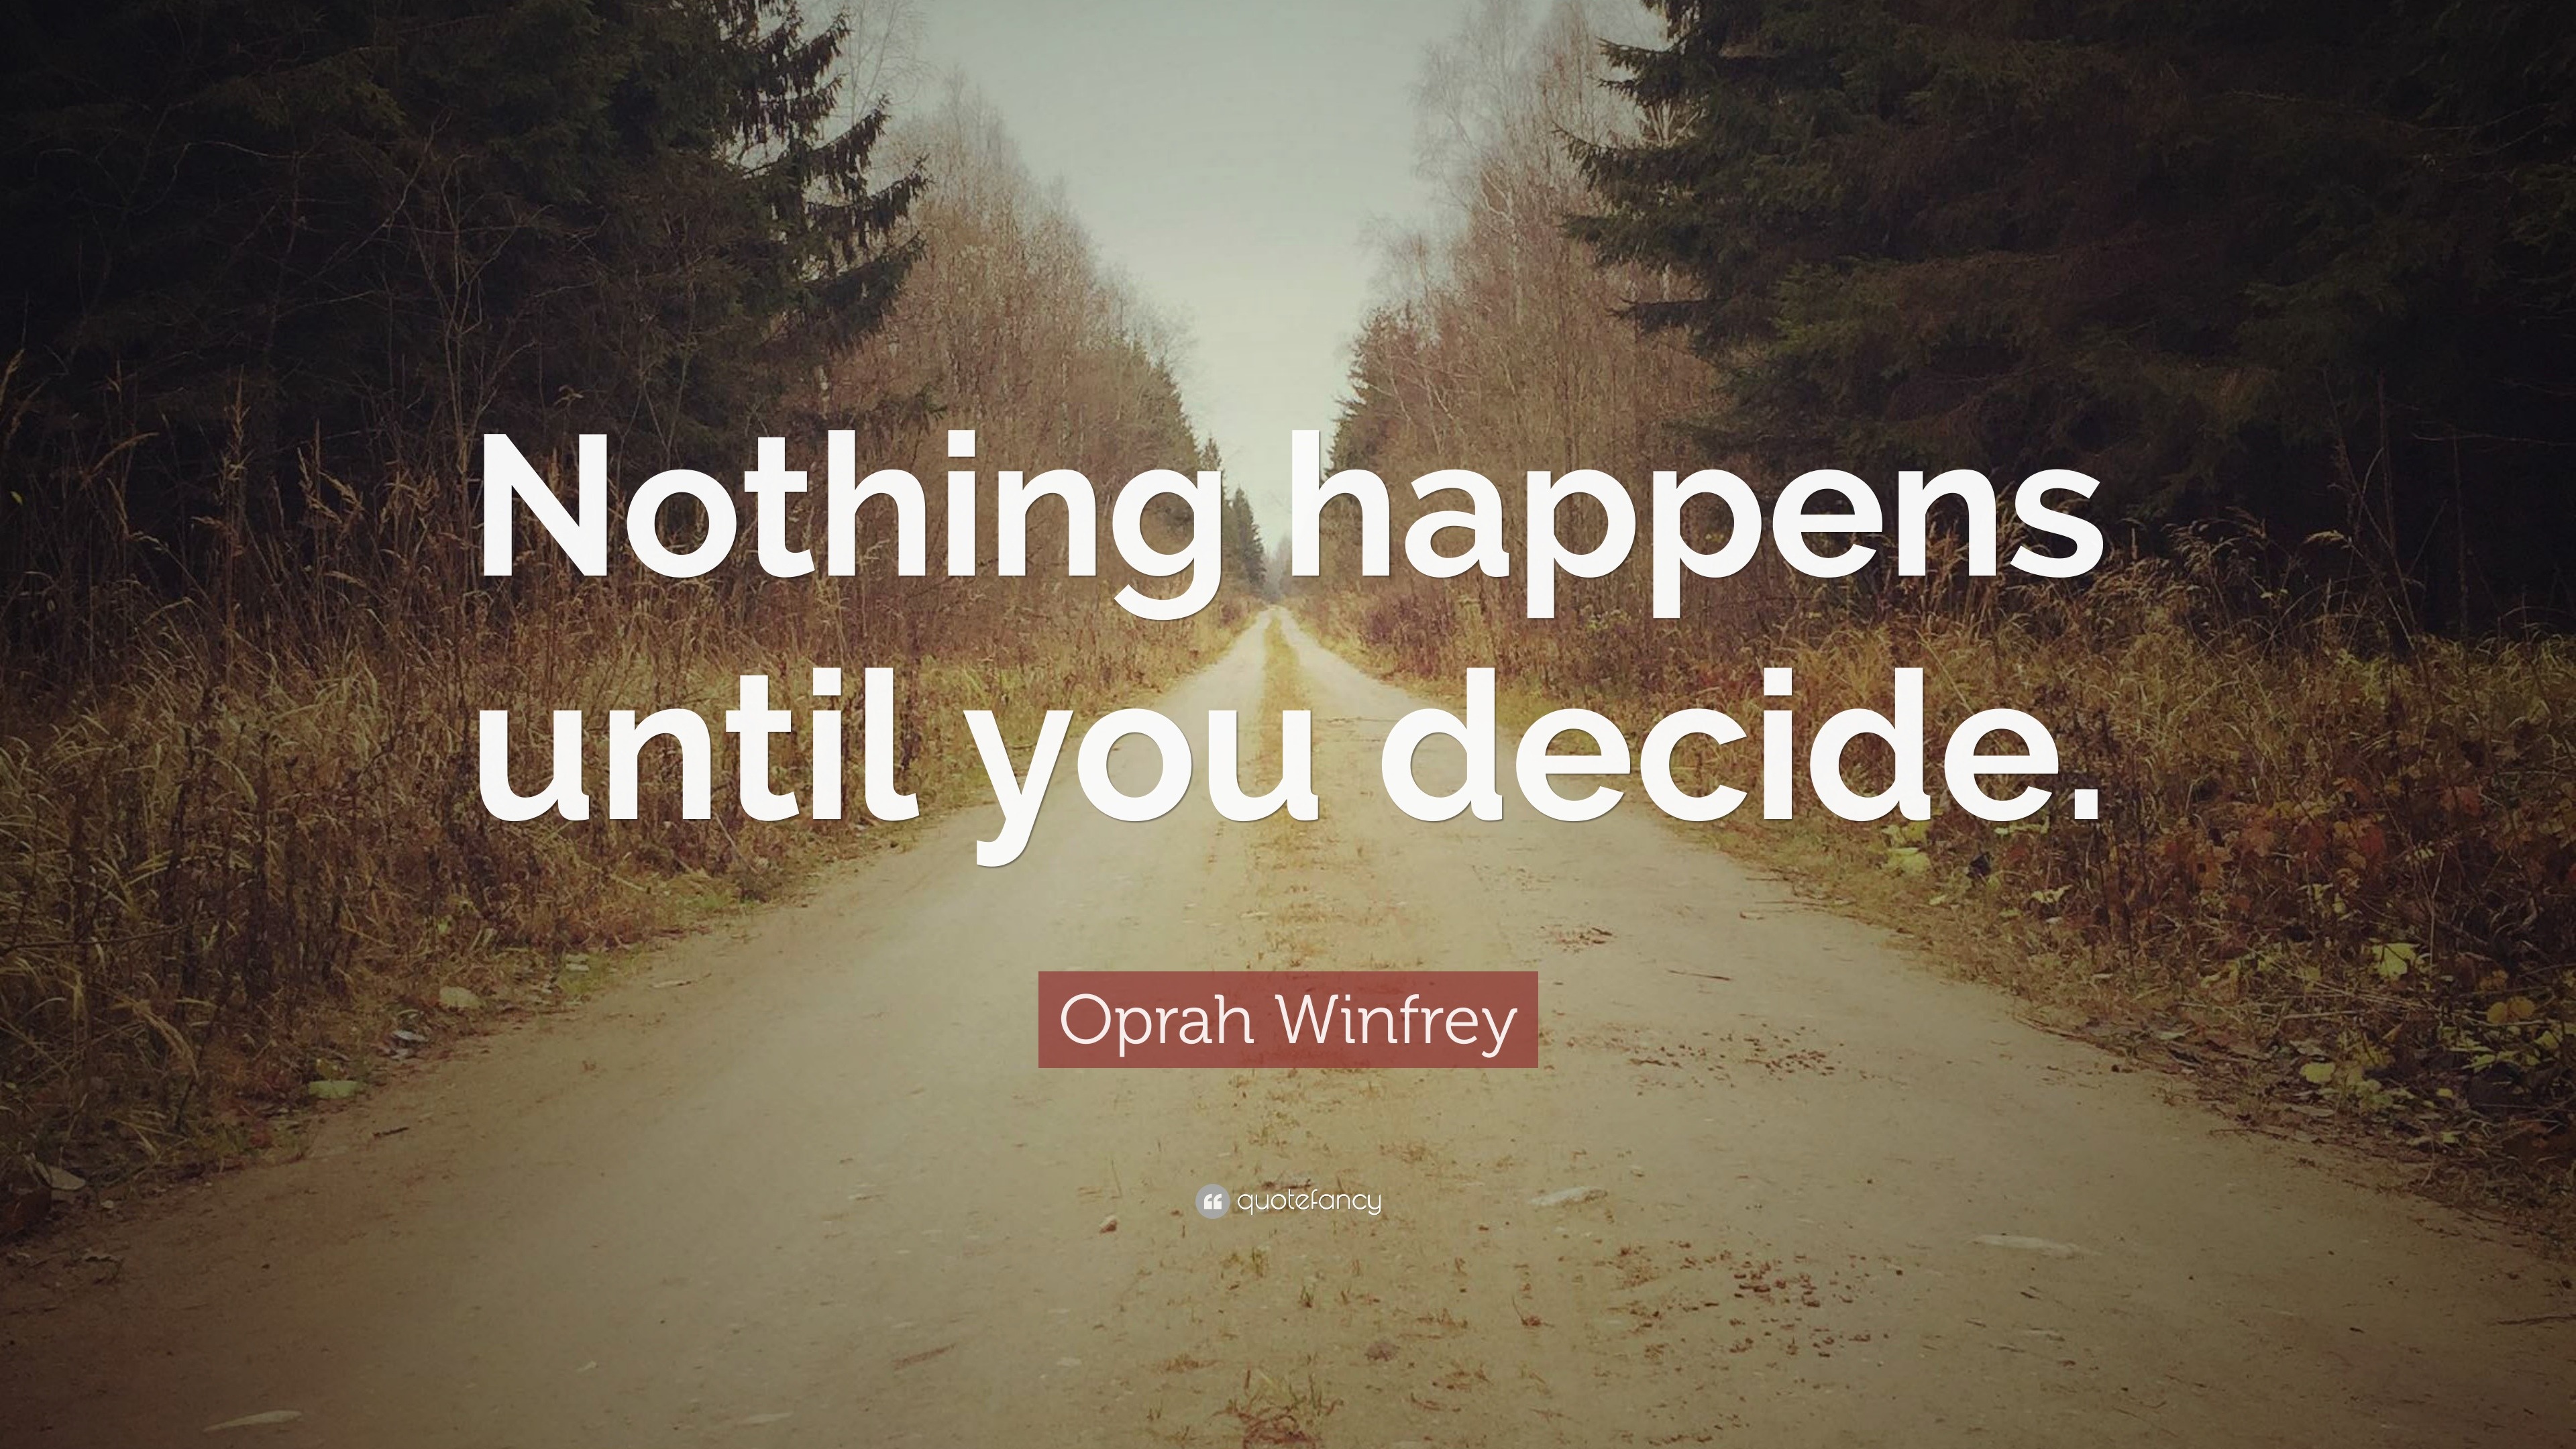 Oprah Winfrey Quote: “Nothing happens until you decide.” (9 wallpapers ...
 Nothing Happens Before Its Time Quotes